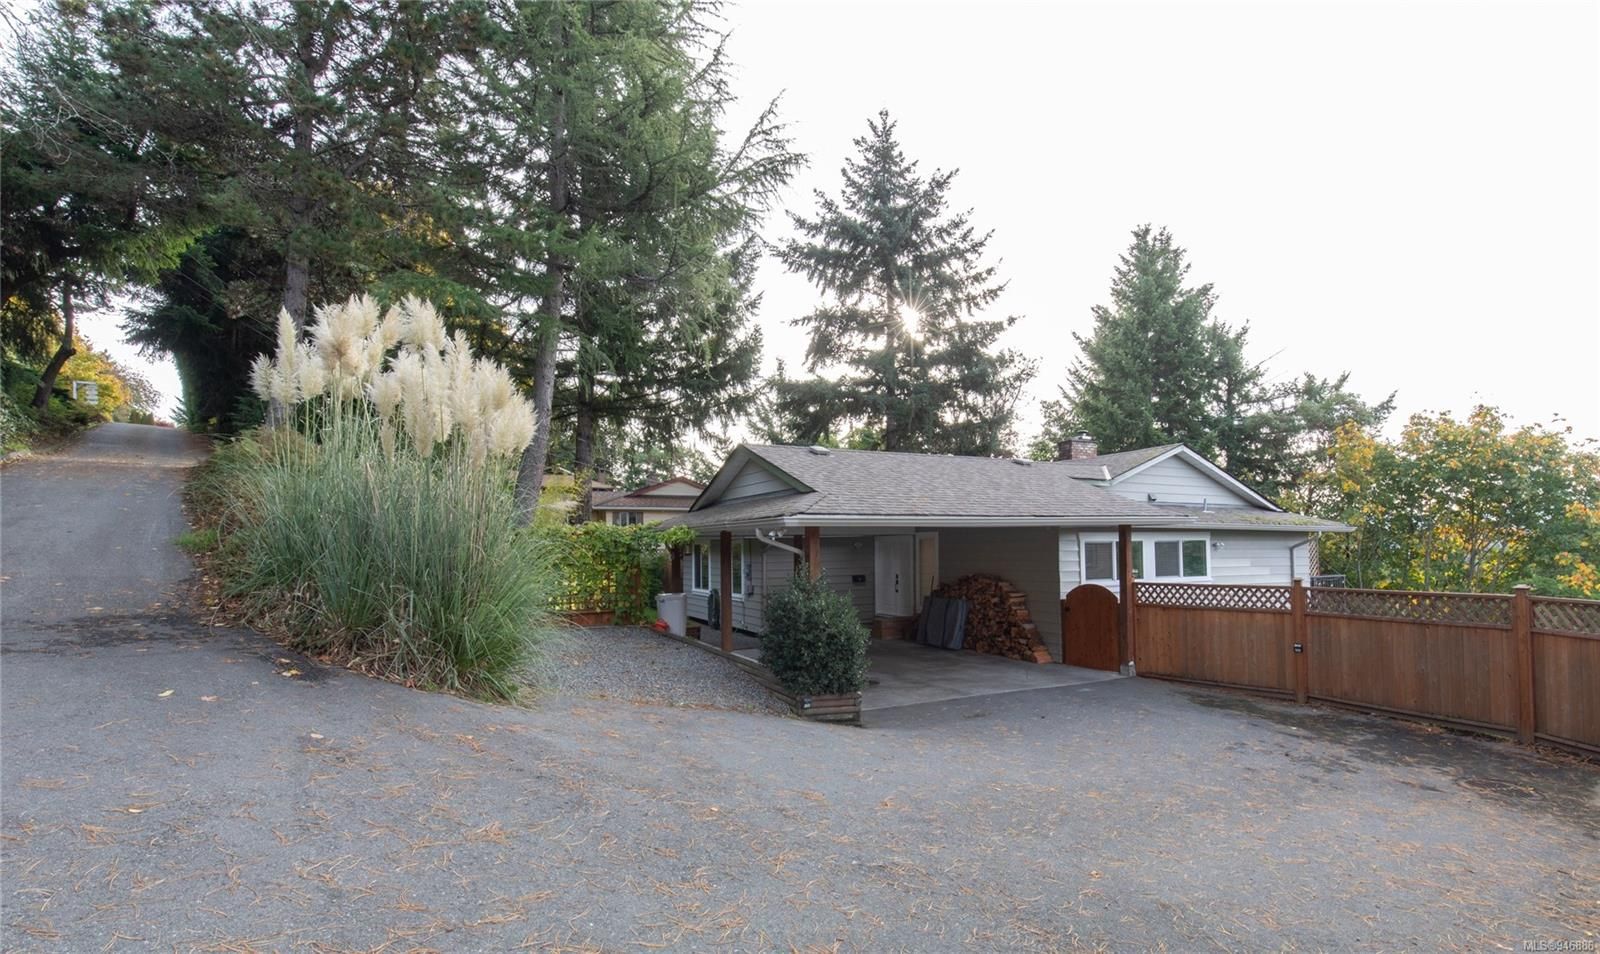 I have sold a property at 3221 Telescope Terr in Nanaimo
